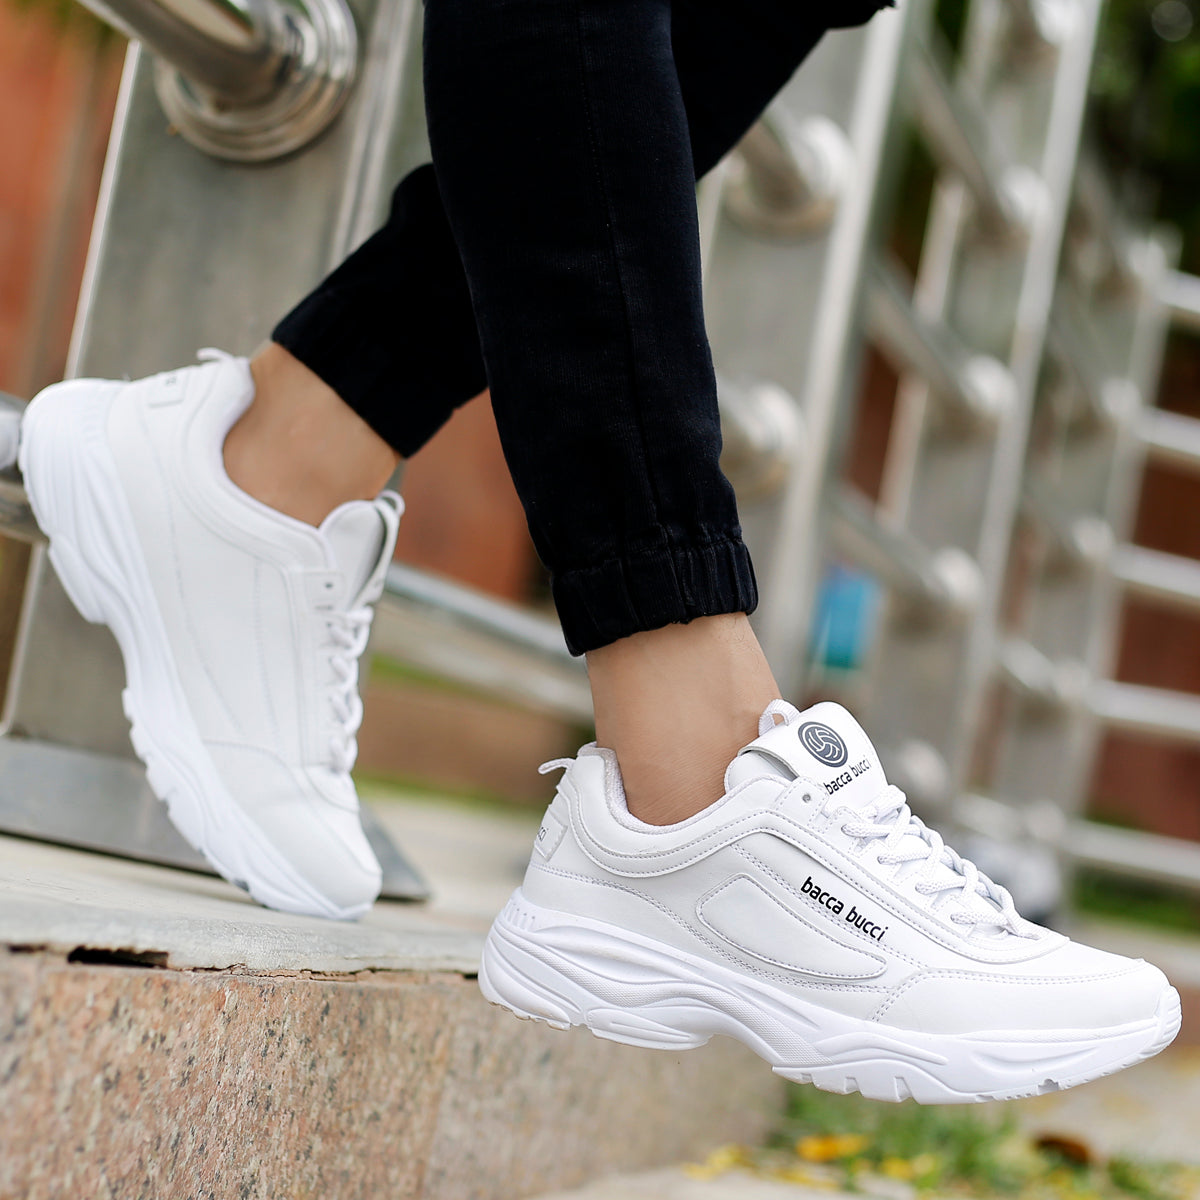 Shop White Sneakers for | Best & Durable Shoes